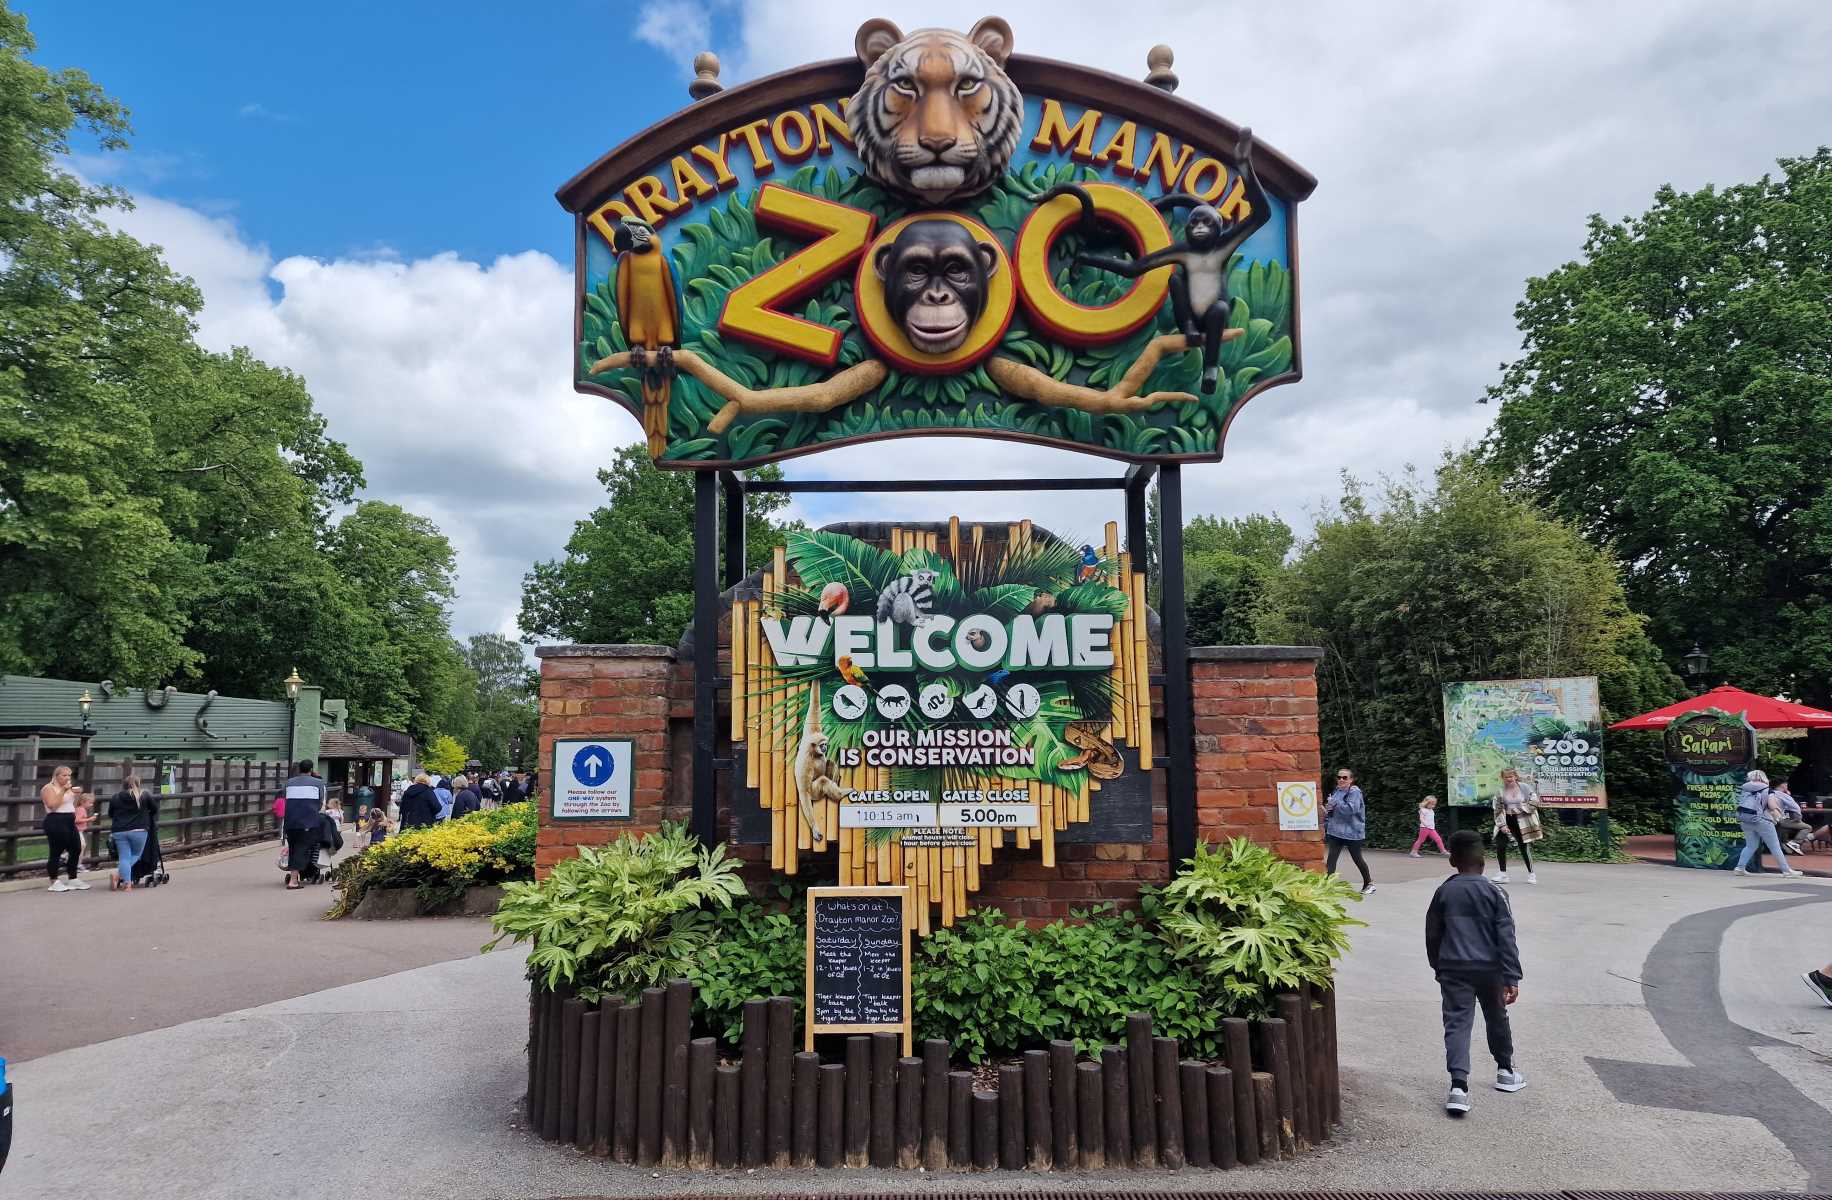 12-intriguing-facts-about-drayton-manor-zoo